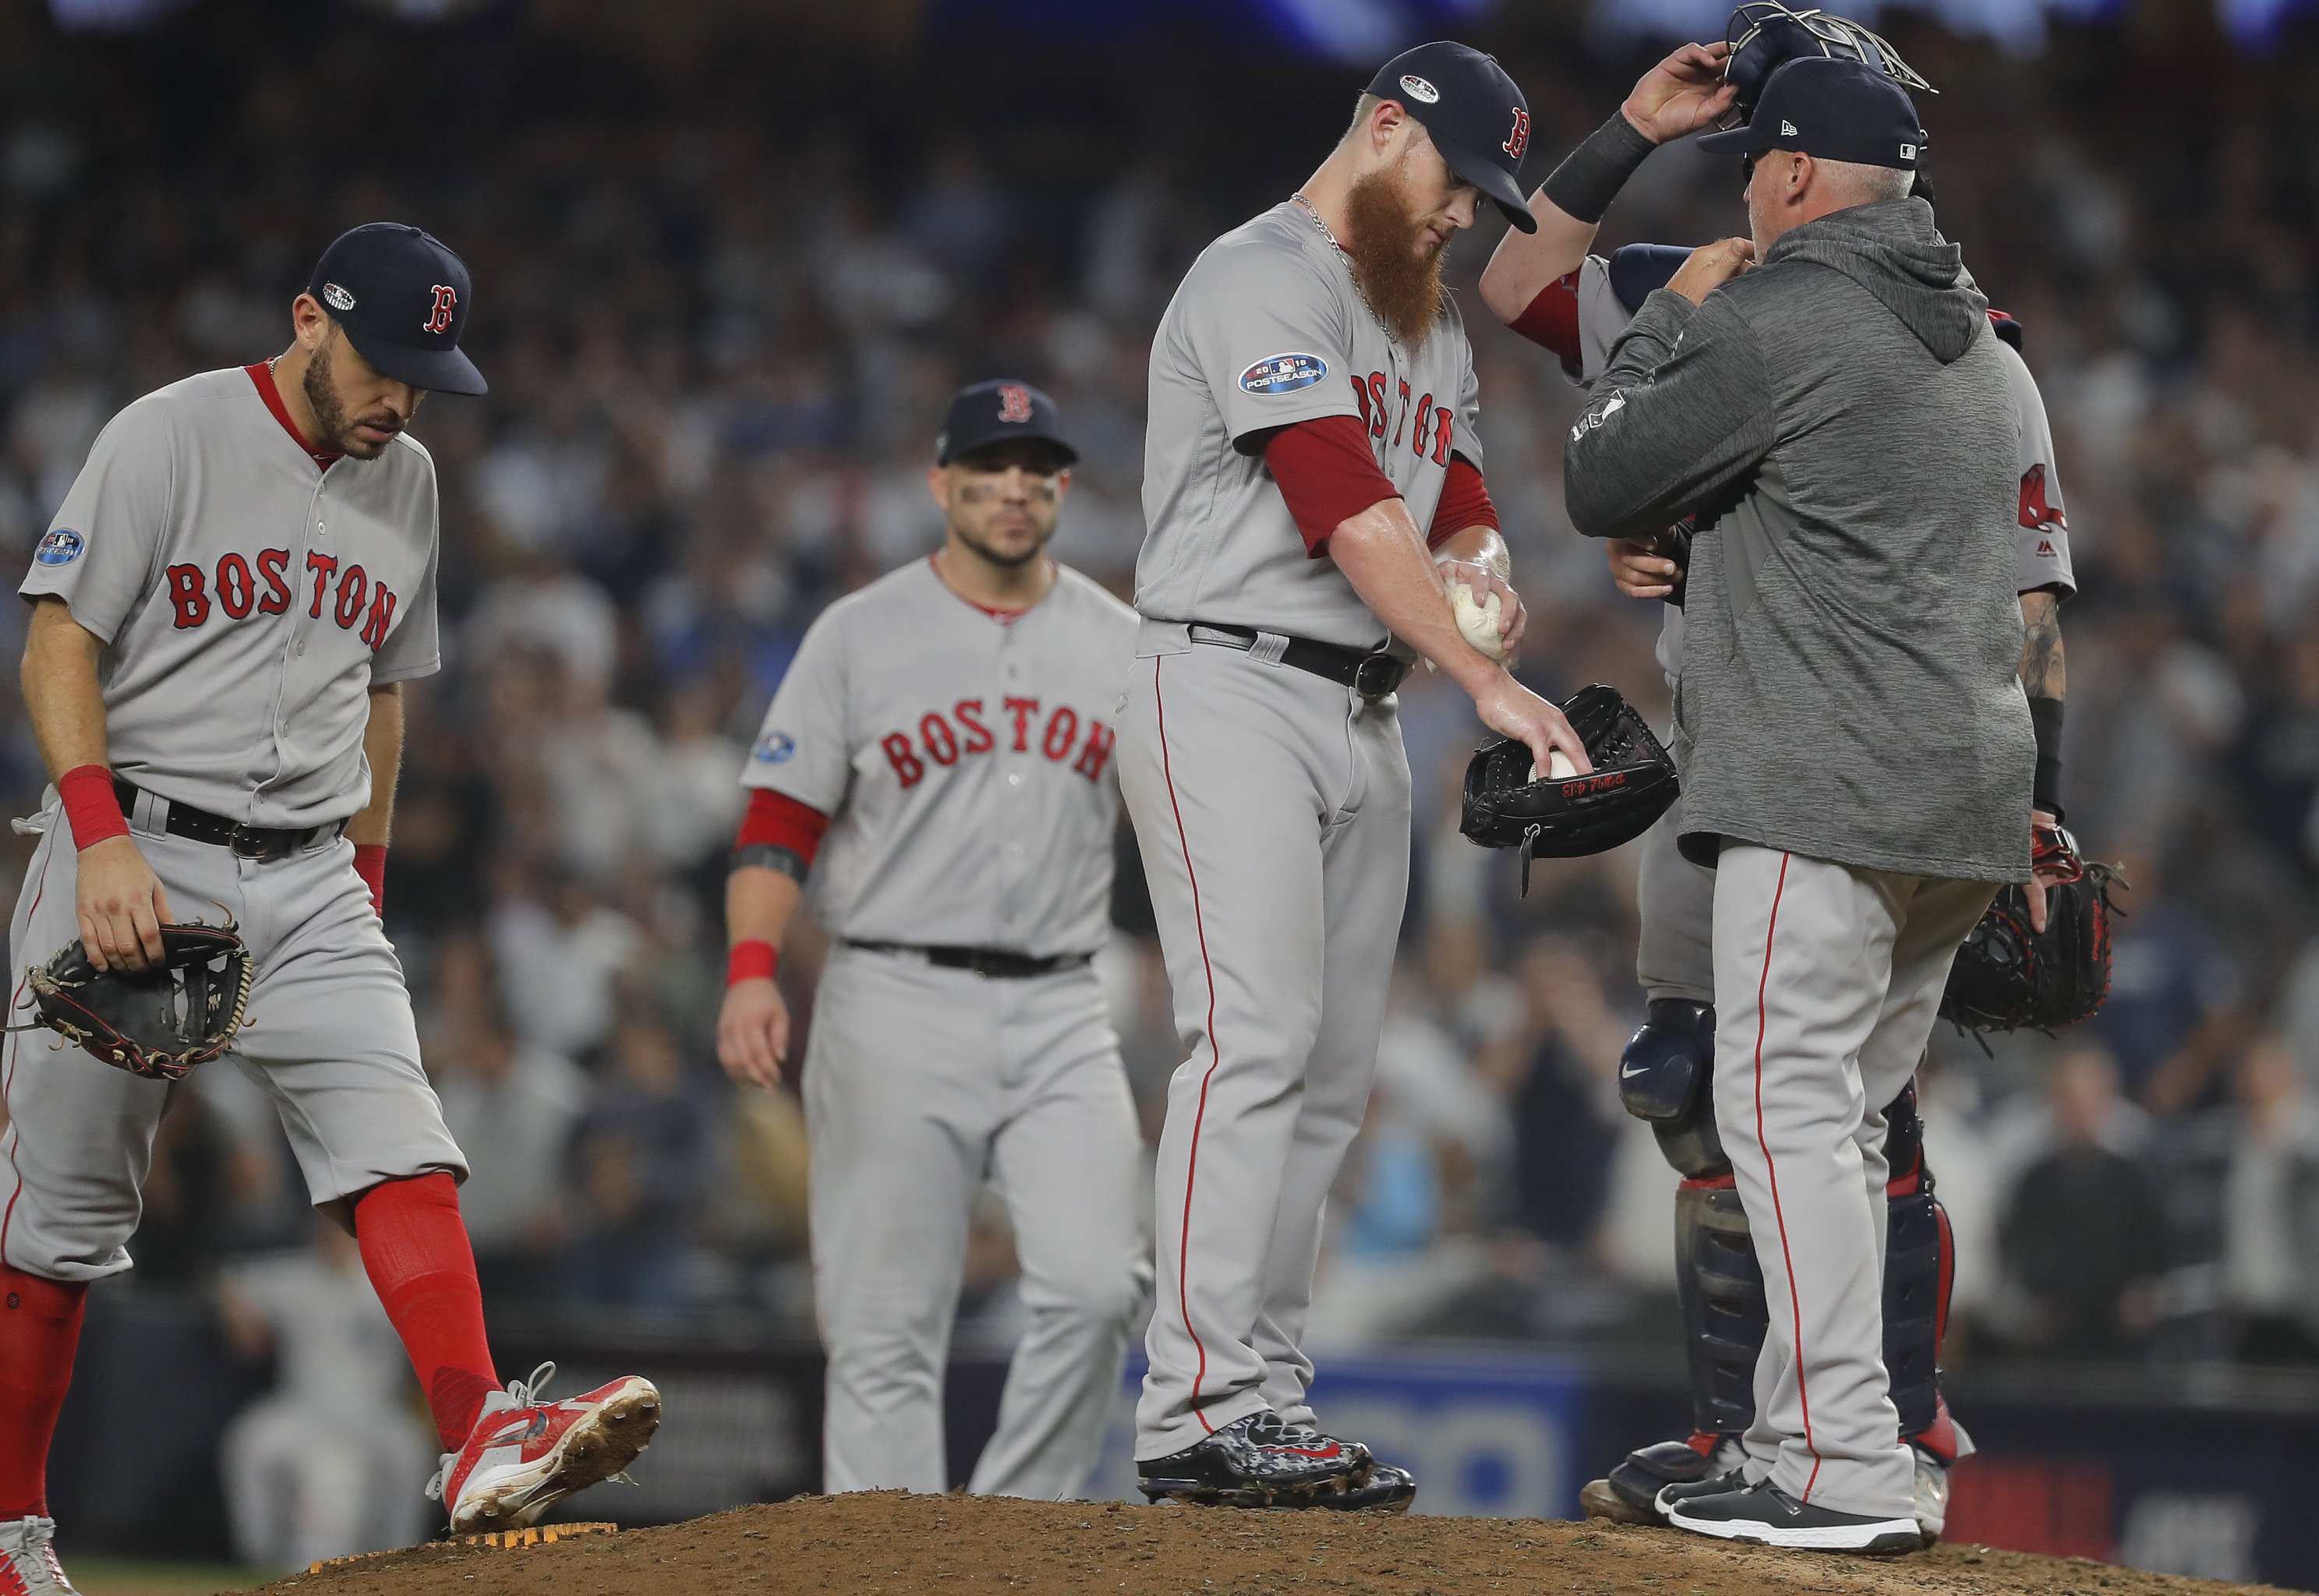 It was Mookie Betts who saved the Red Sox after Craig Kimbrel couldn't -  The Boston Globe